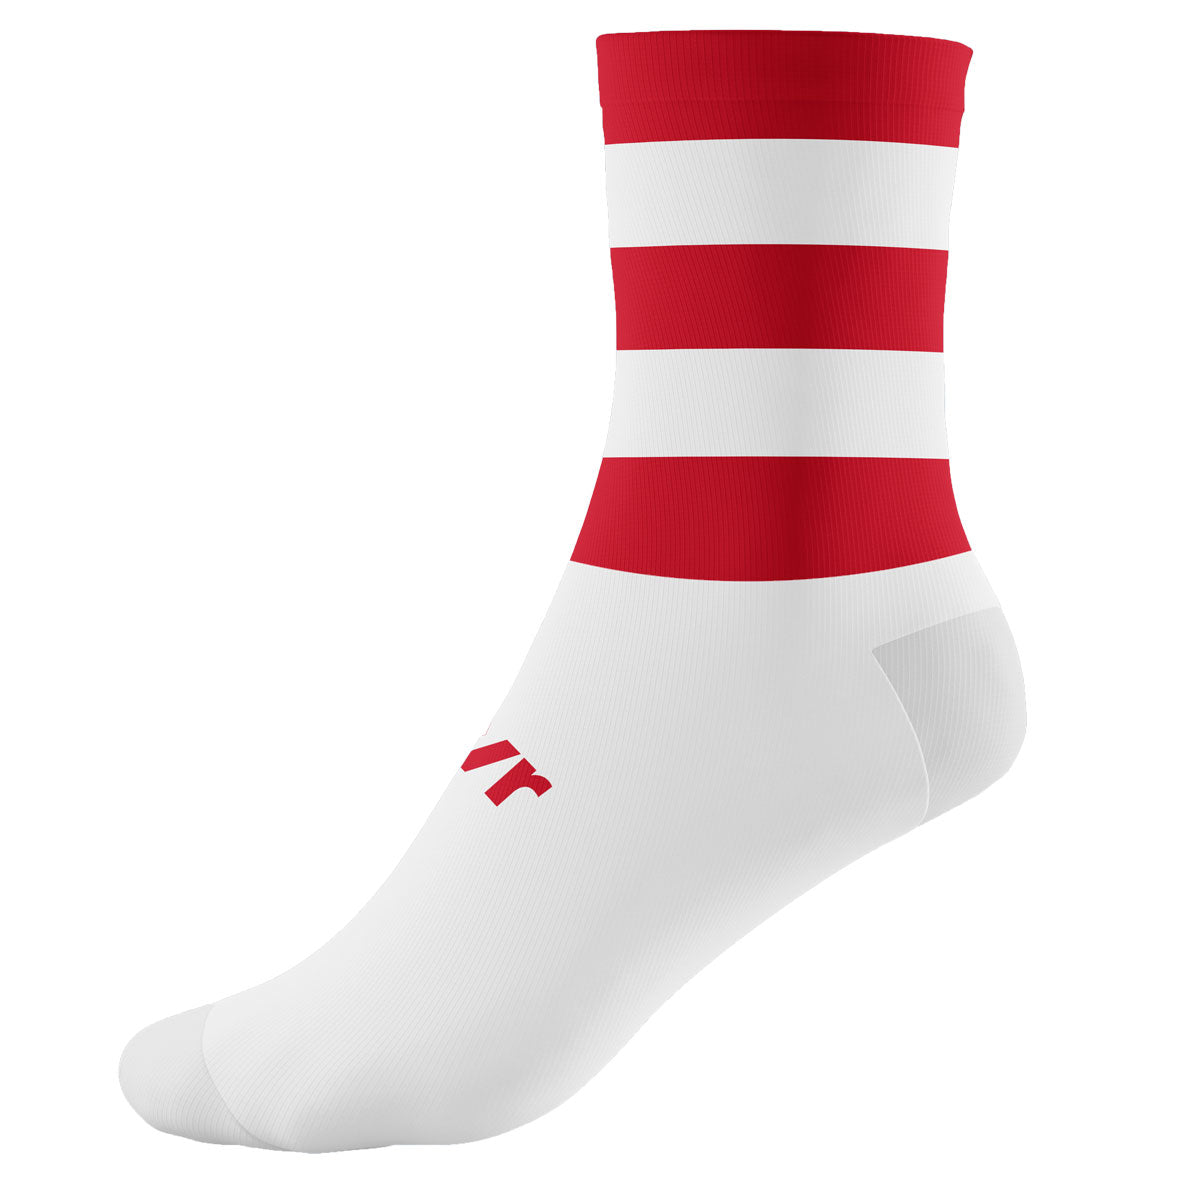 Mc Keever Pro Mid Hooped Socks - Youth - White/Red/White